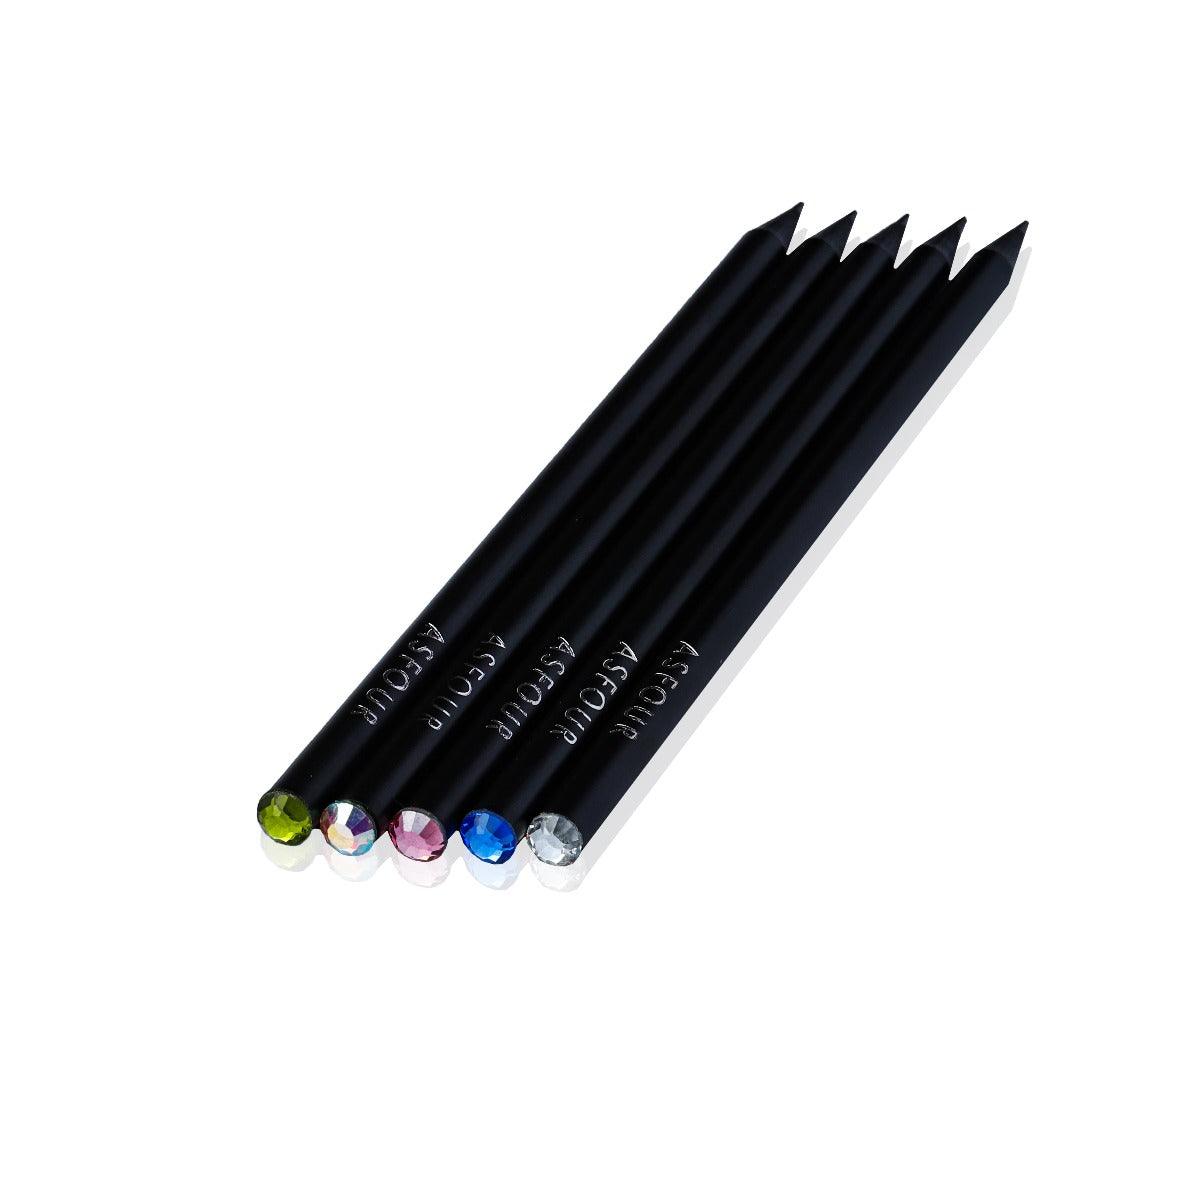 Crystal Pencil - multi colors -Box of 5 pieces - Asfour Crystal